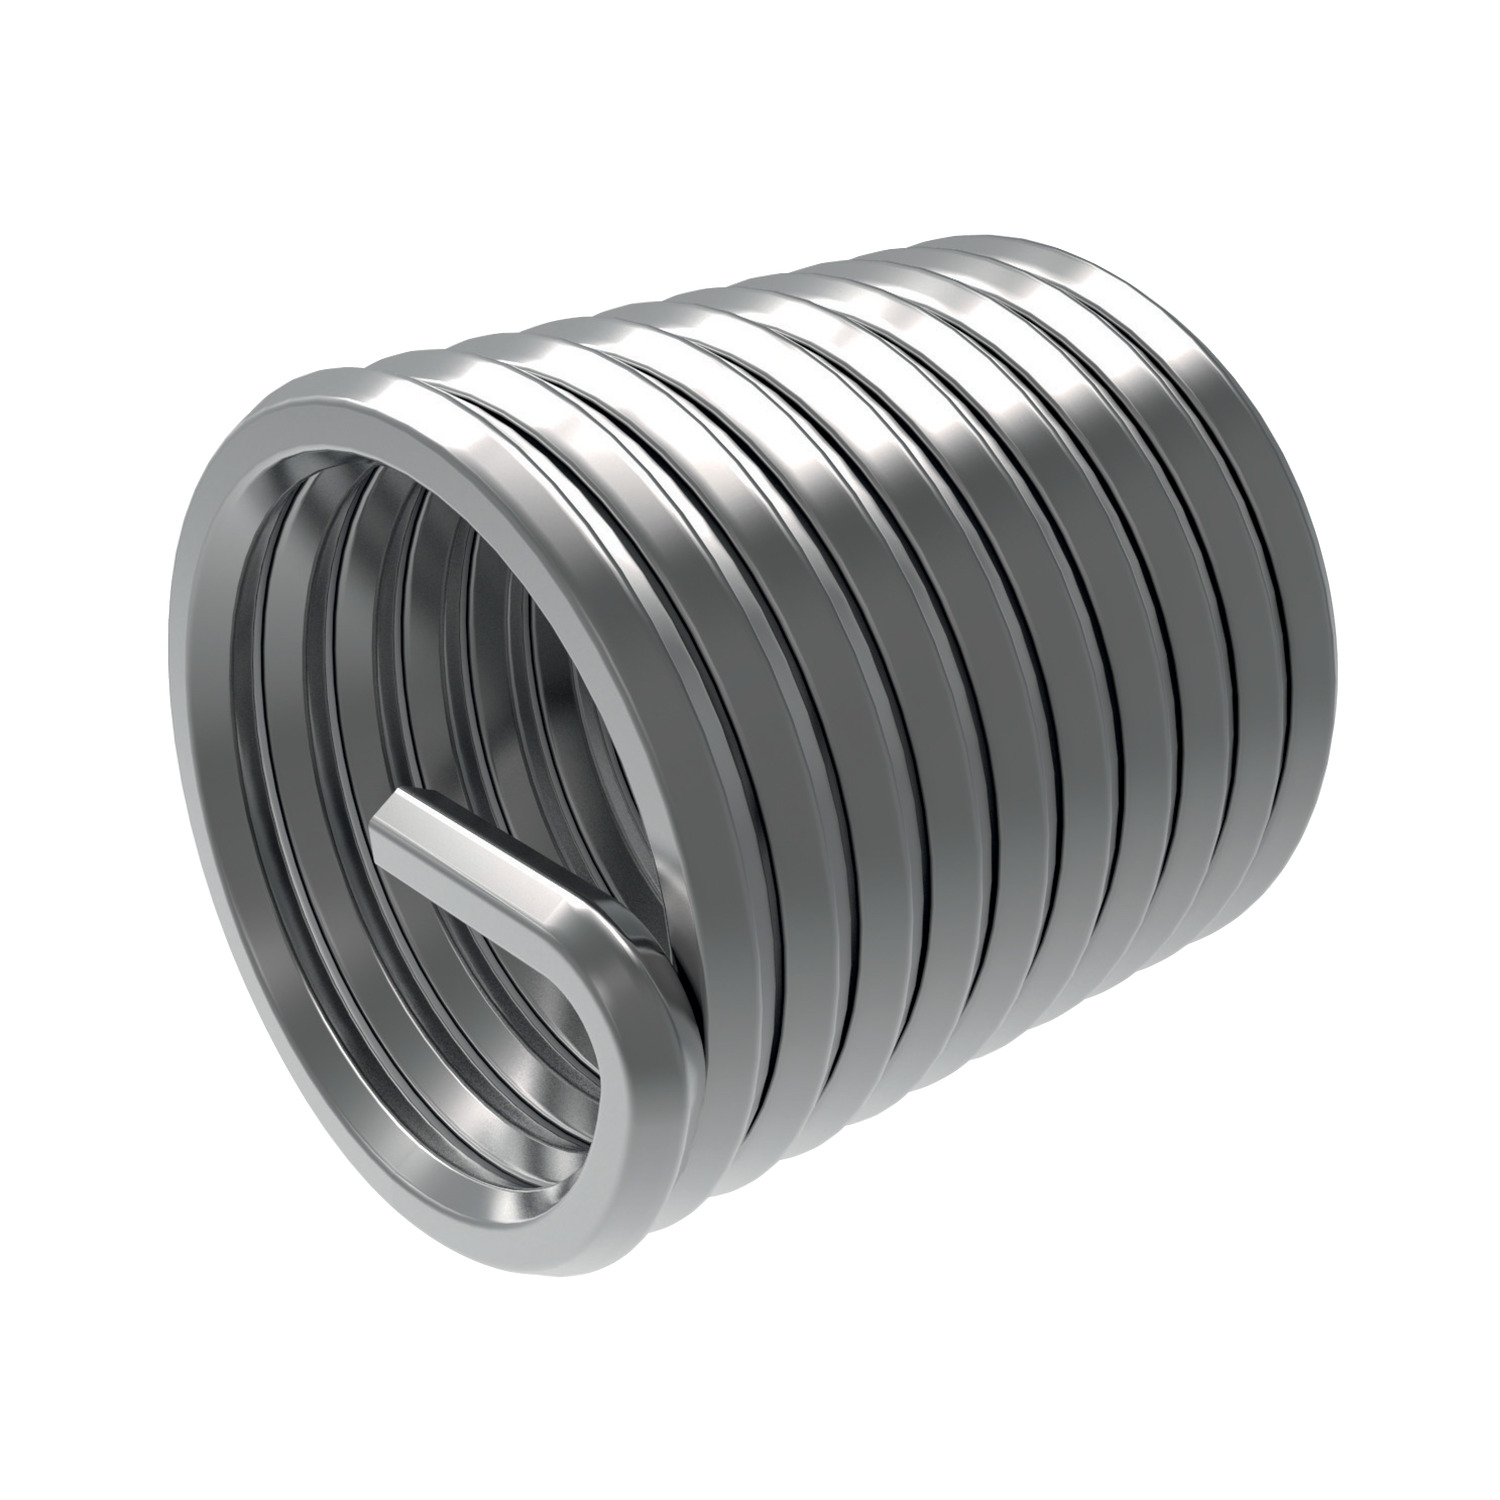 Wire Thread Inserts - Free Running Stainless steel A2. Threaded inserts are manufactured to DIN 8140-1A